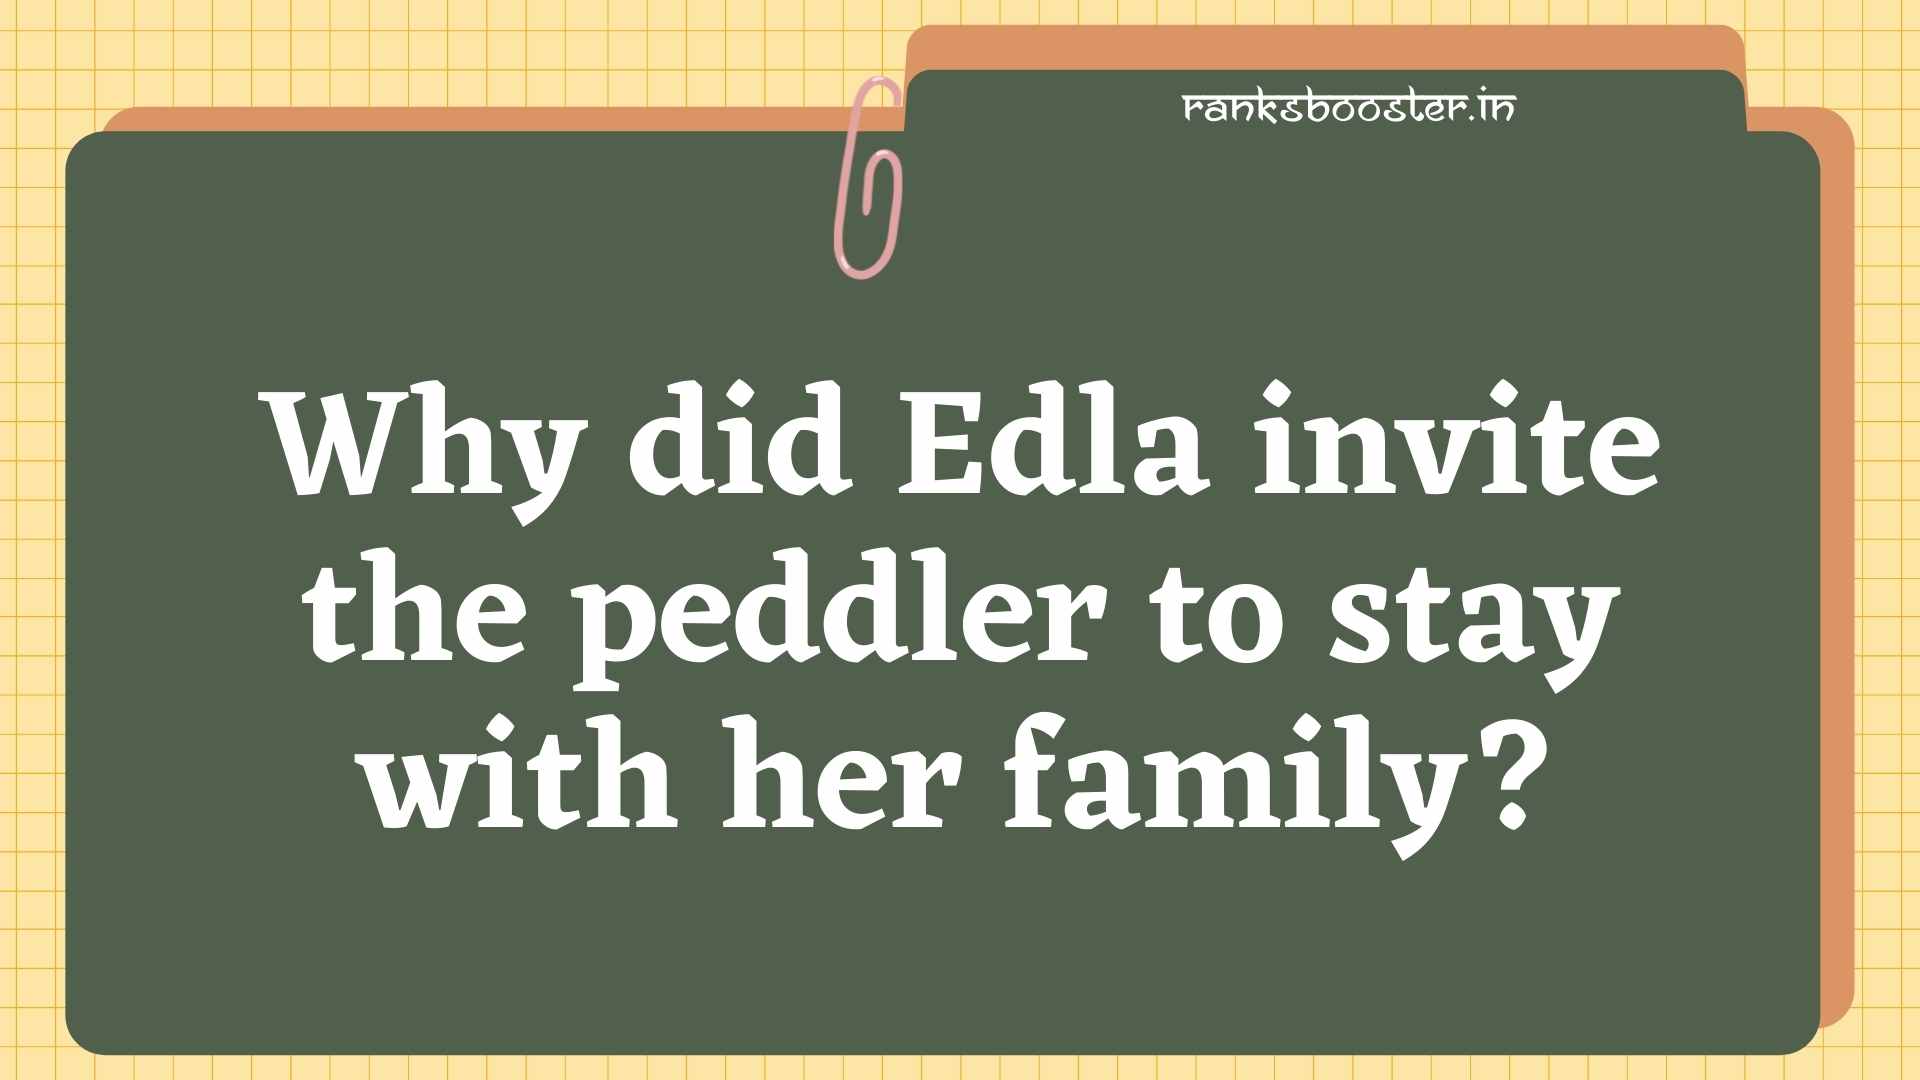 Why did Edla invite the peddler to stay with her family? [CBSE (F) 2013]